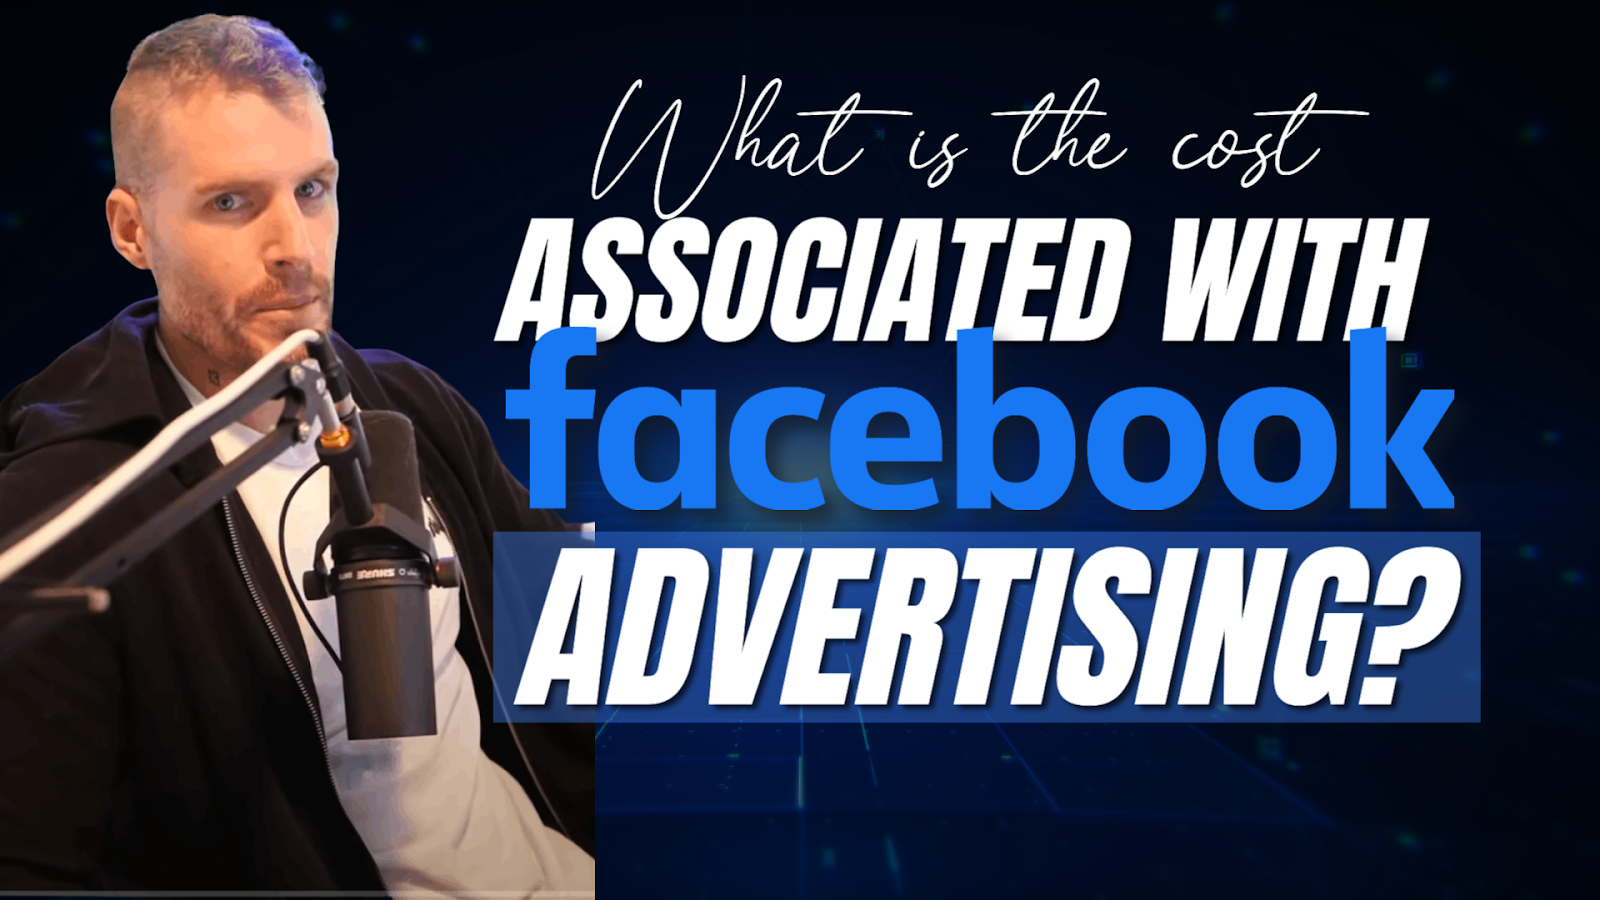 What Is the Cost Associated with Facebook Advertising